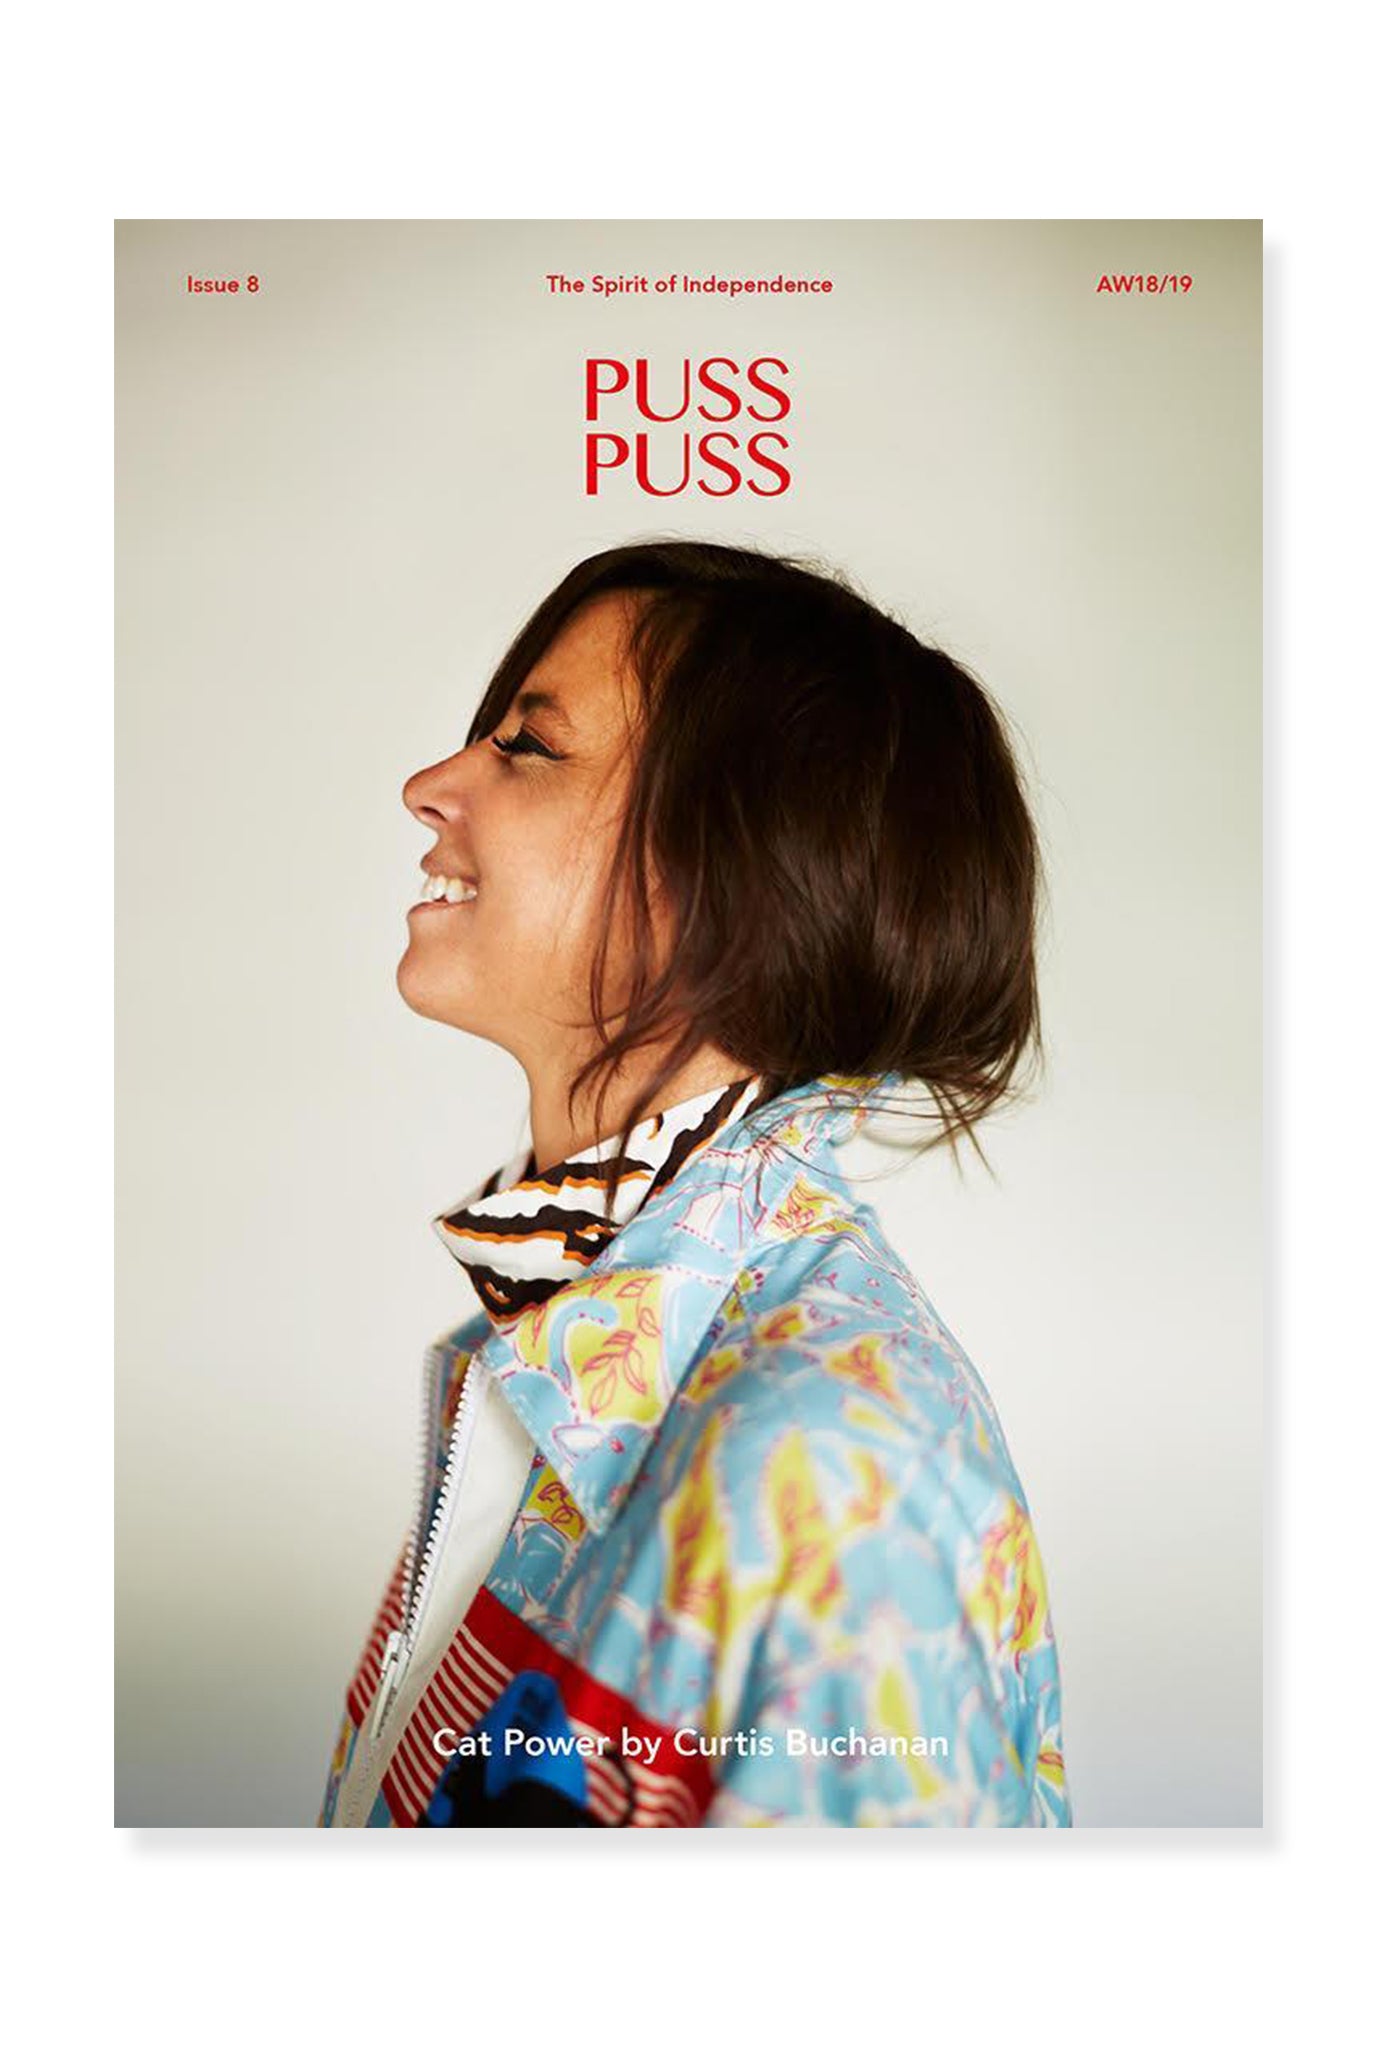 Puss Puss, Issue 8